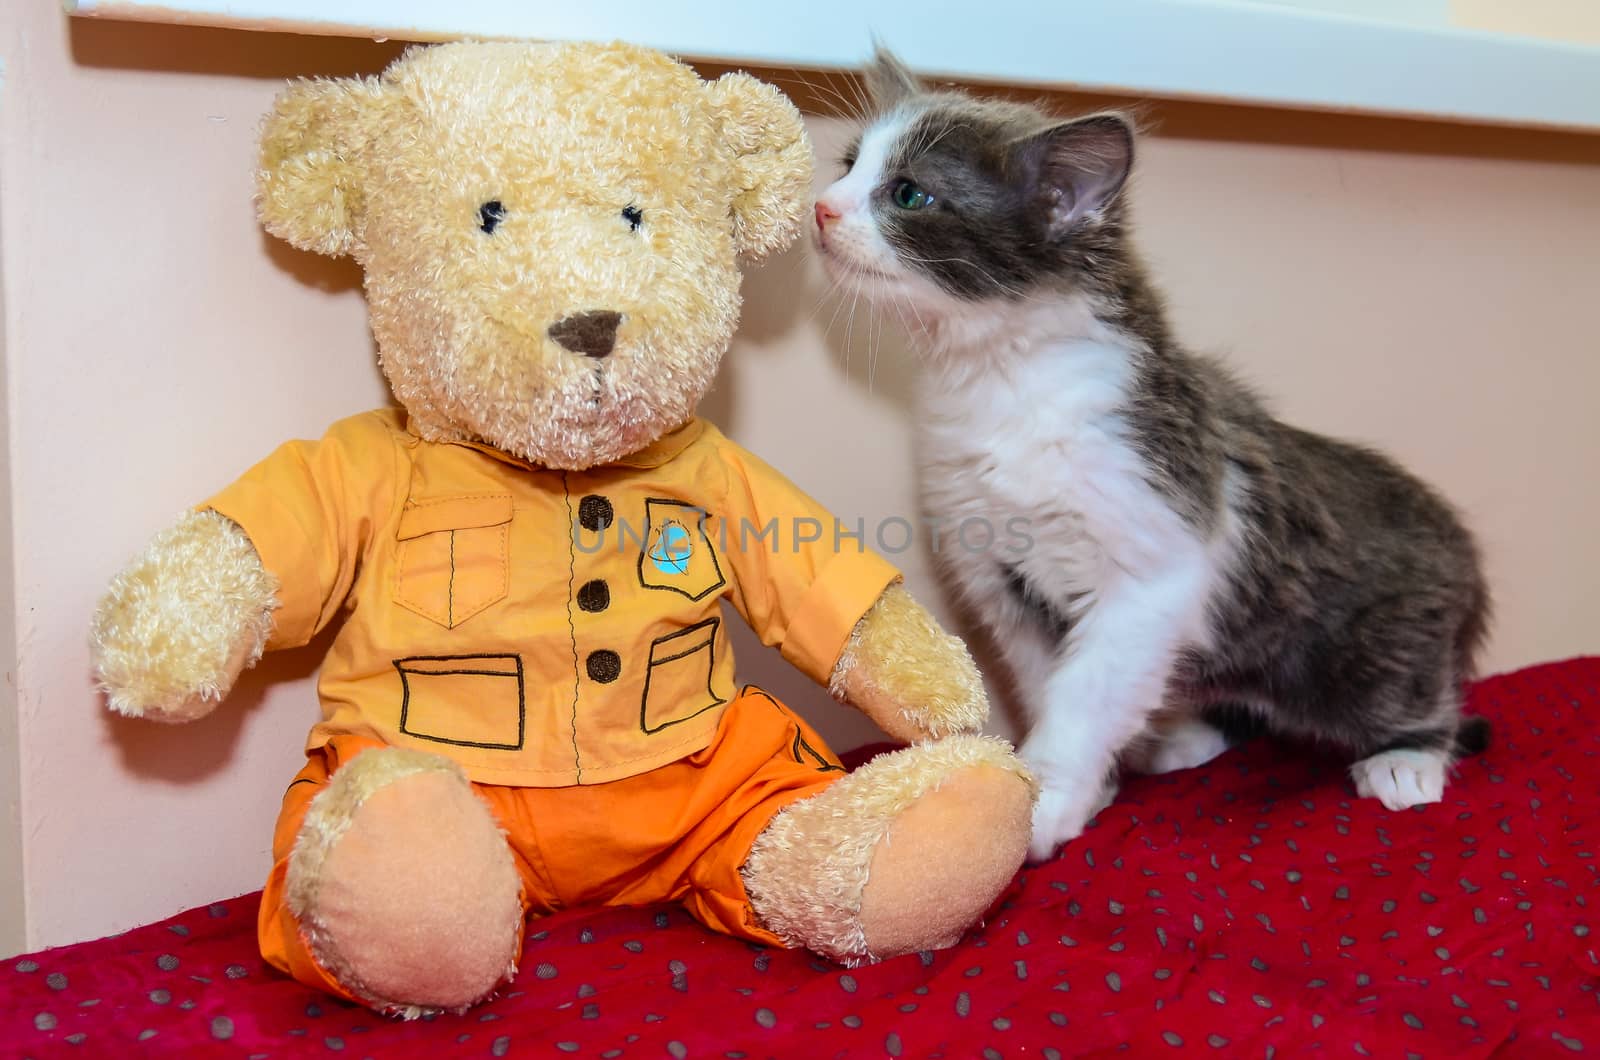 kitten and teddy bear on a red blanket by chernobrovin